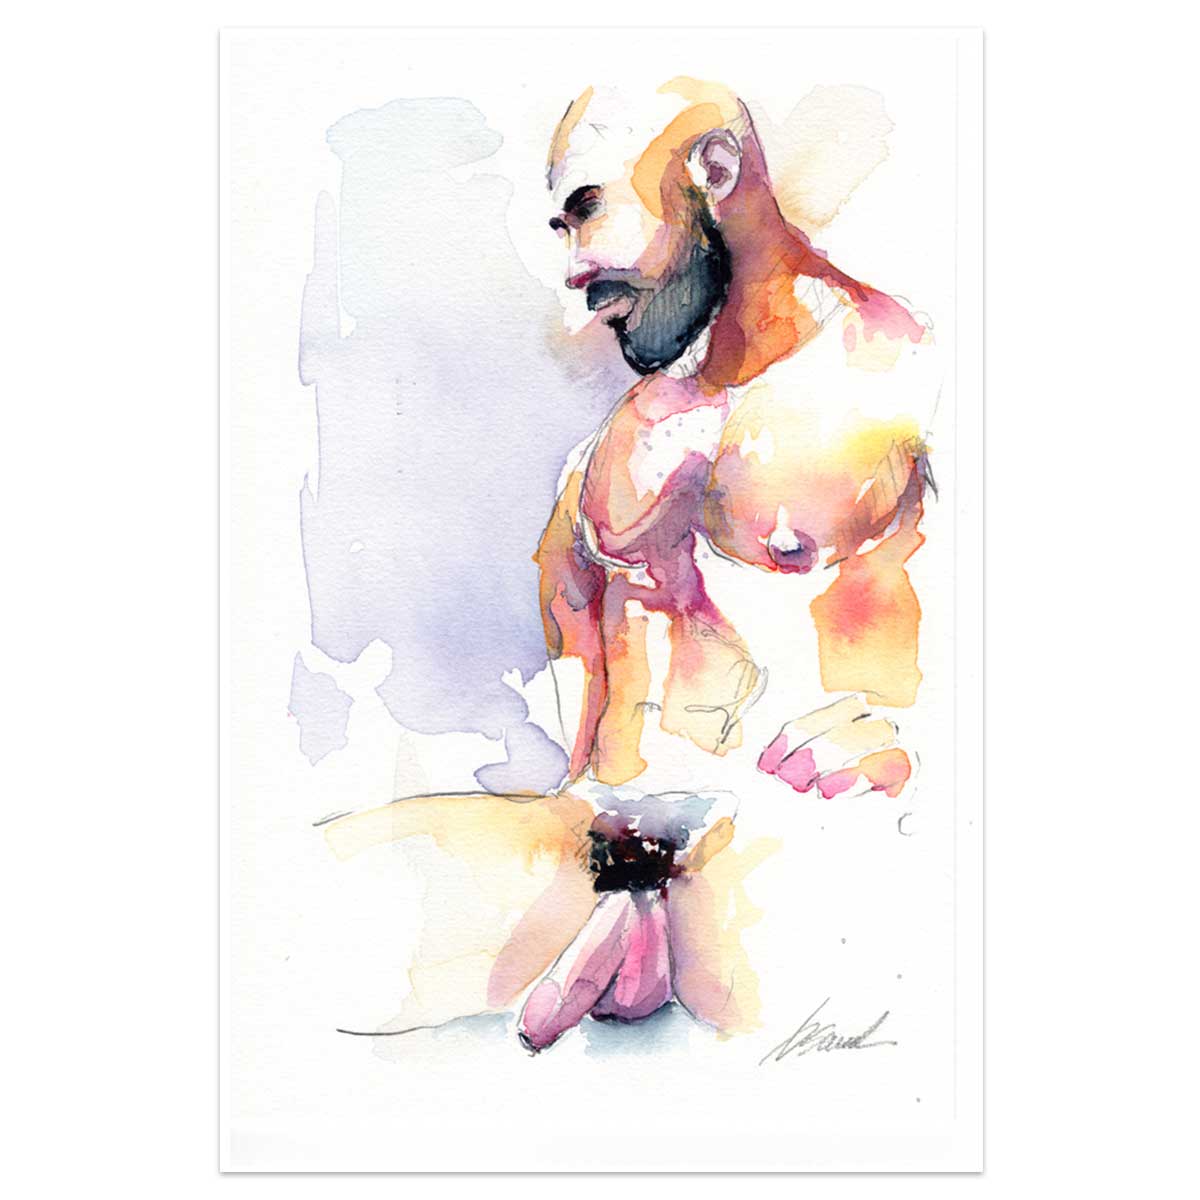 Rugged Contemplation - Muscular Chest and Defined Pecs - Original Art